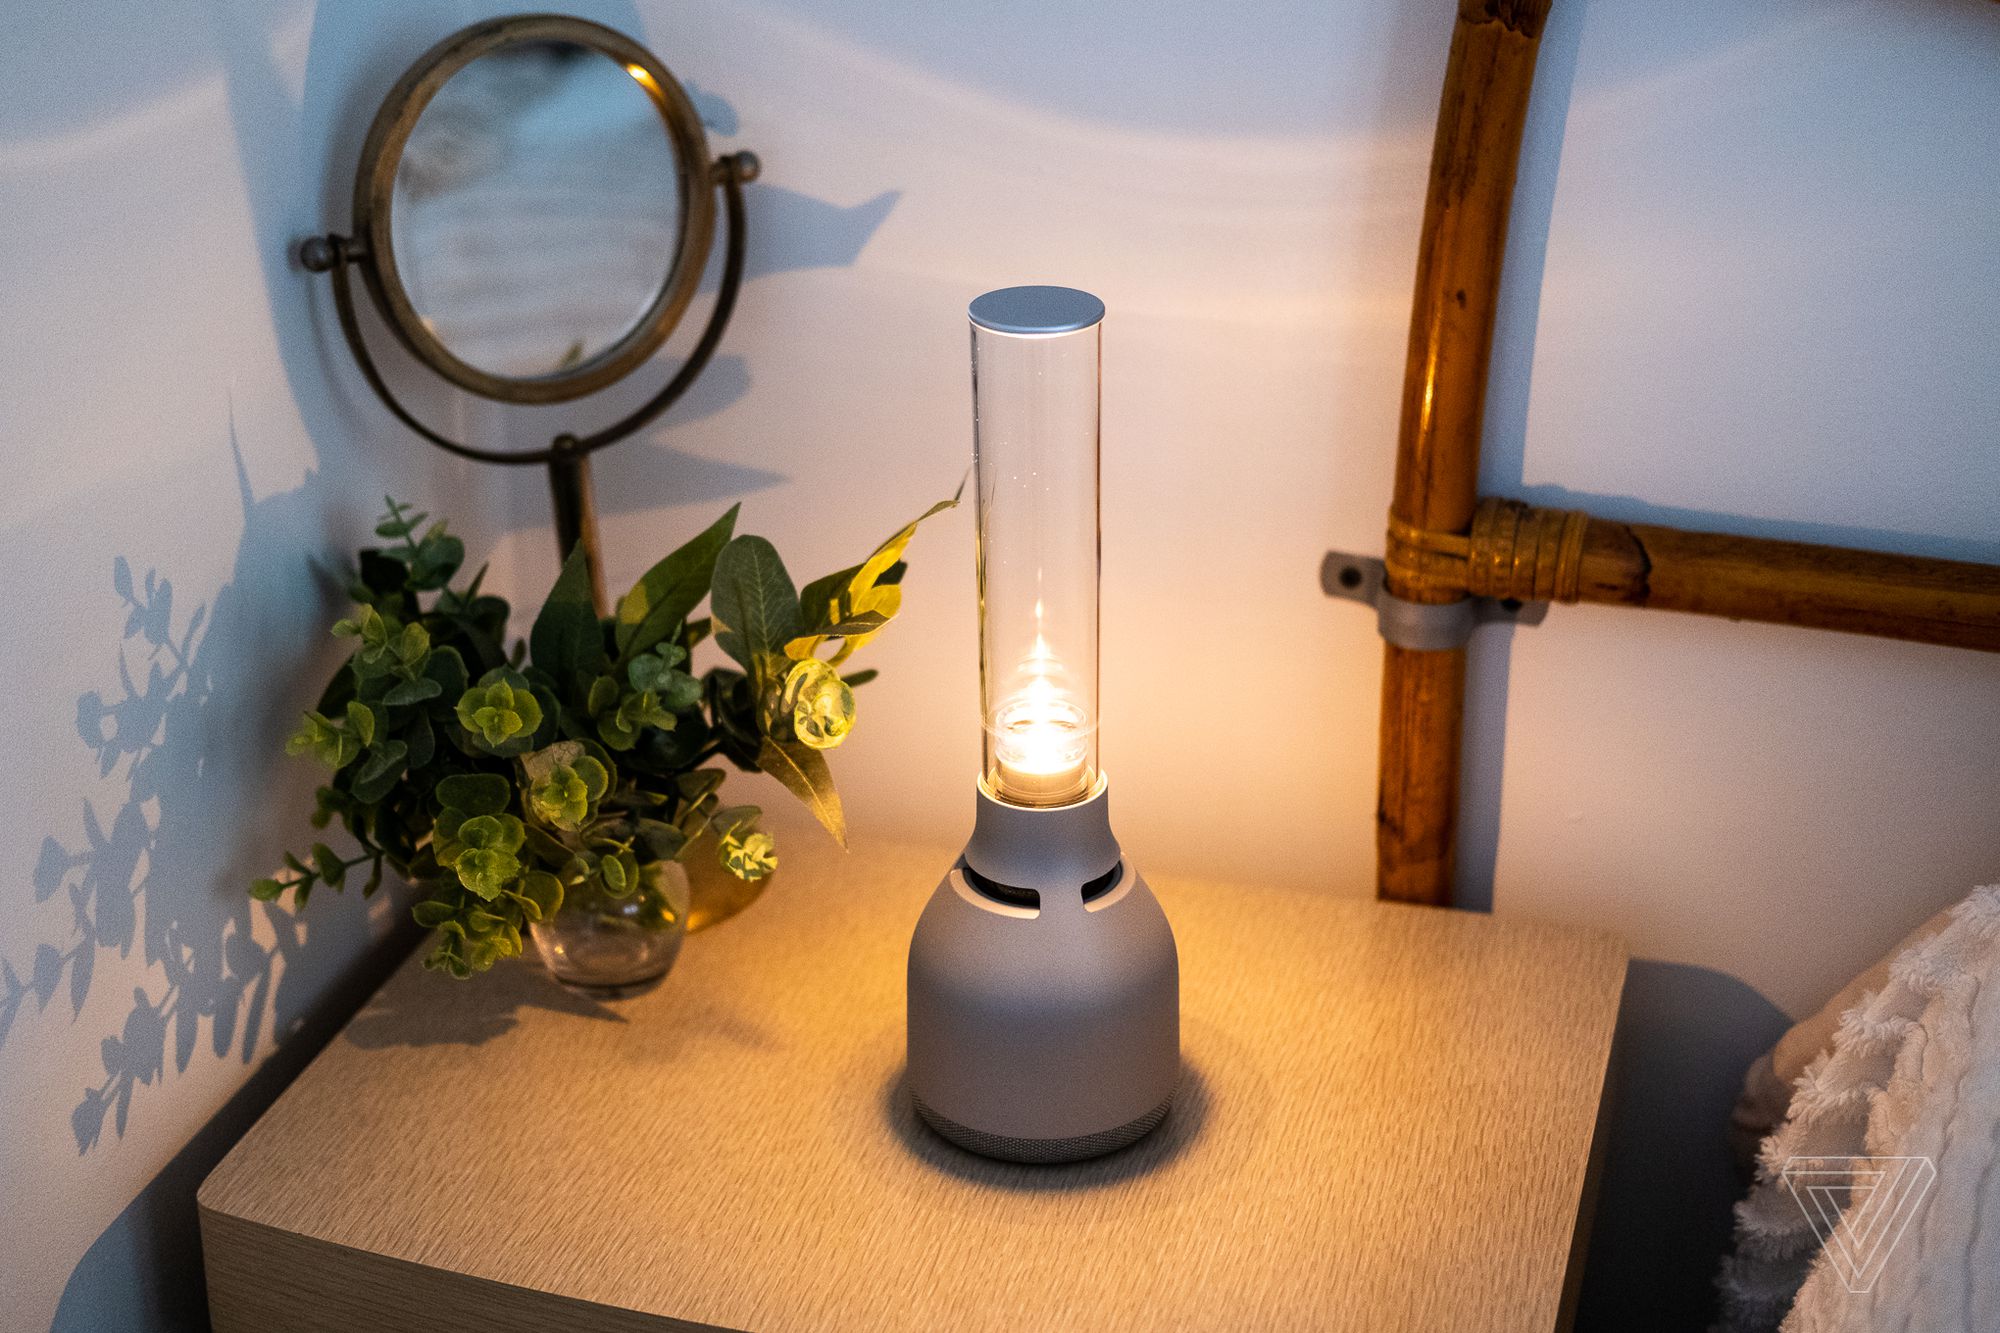 Sony Glass Sound Speaker review: it's not what it looks like - The